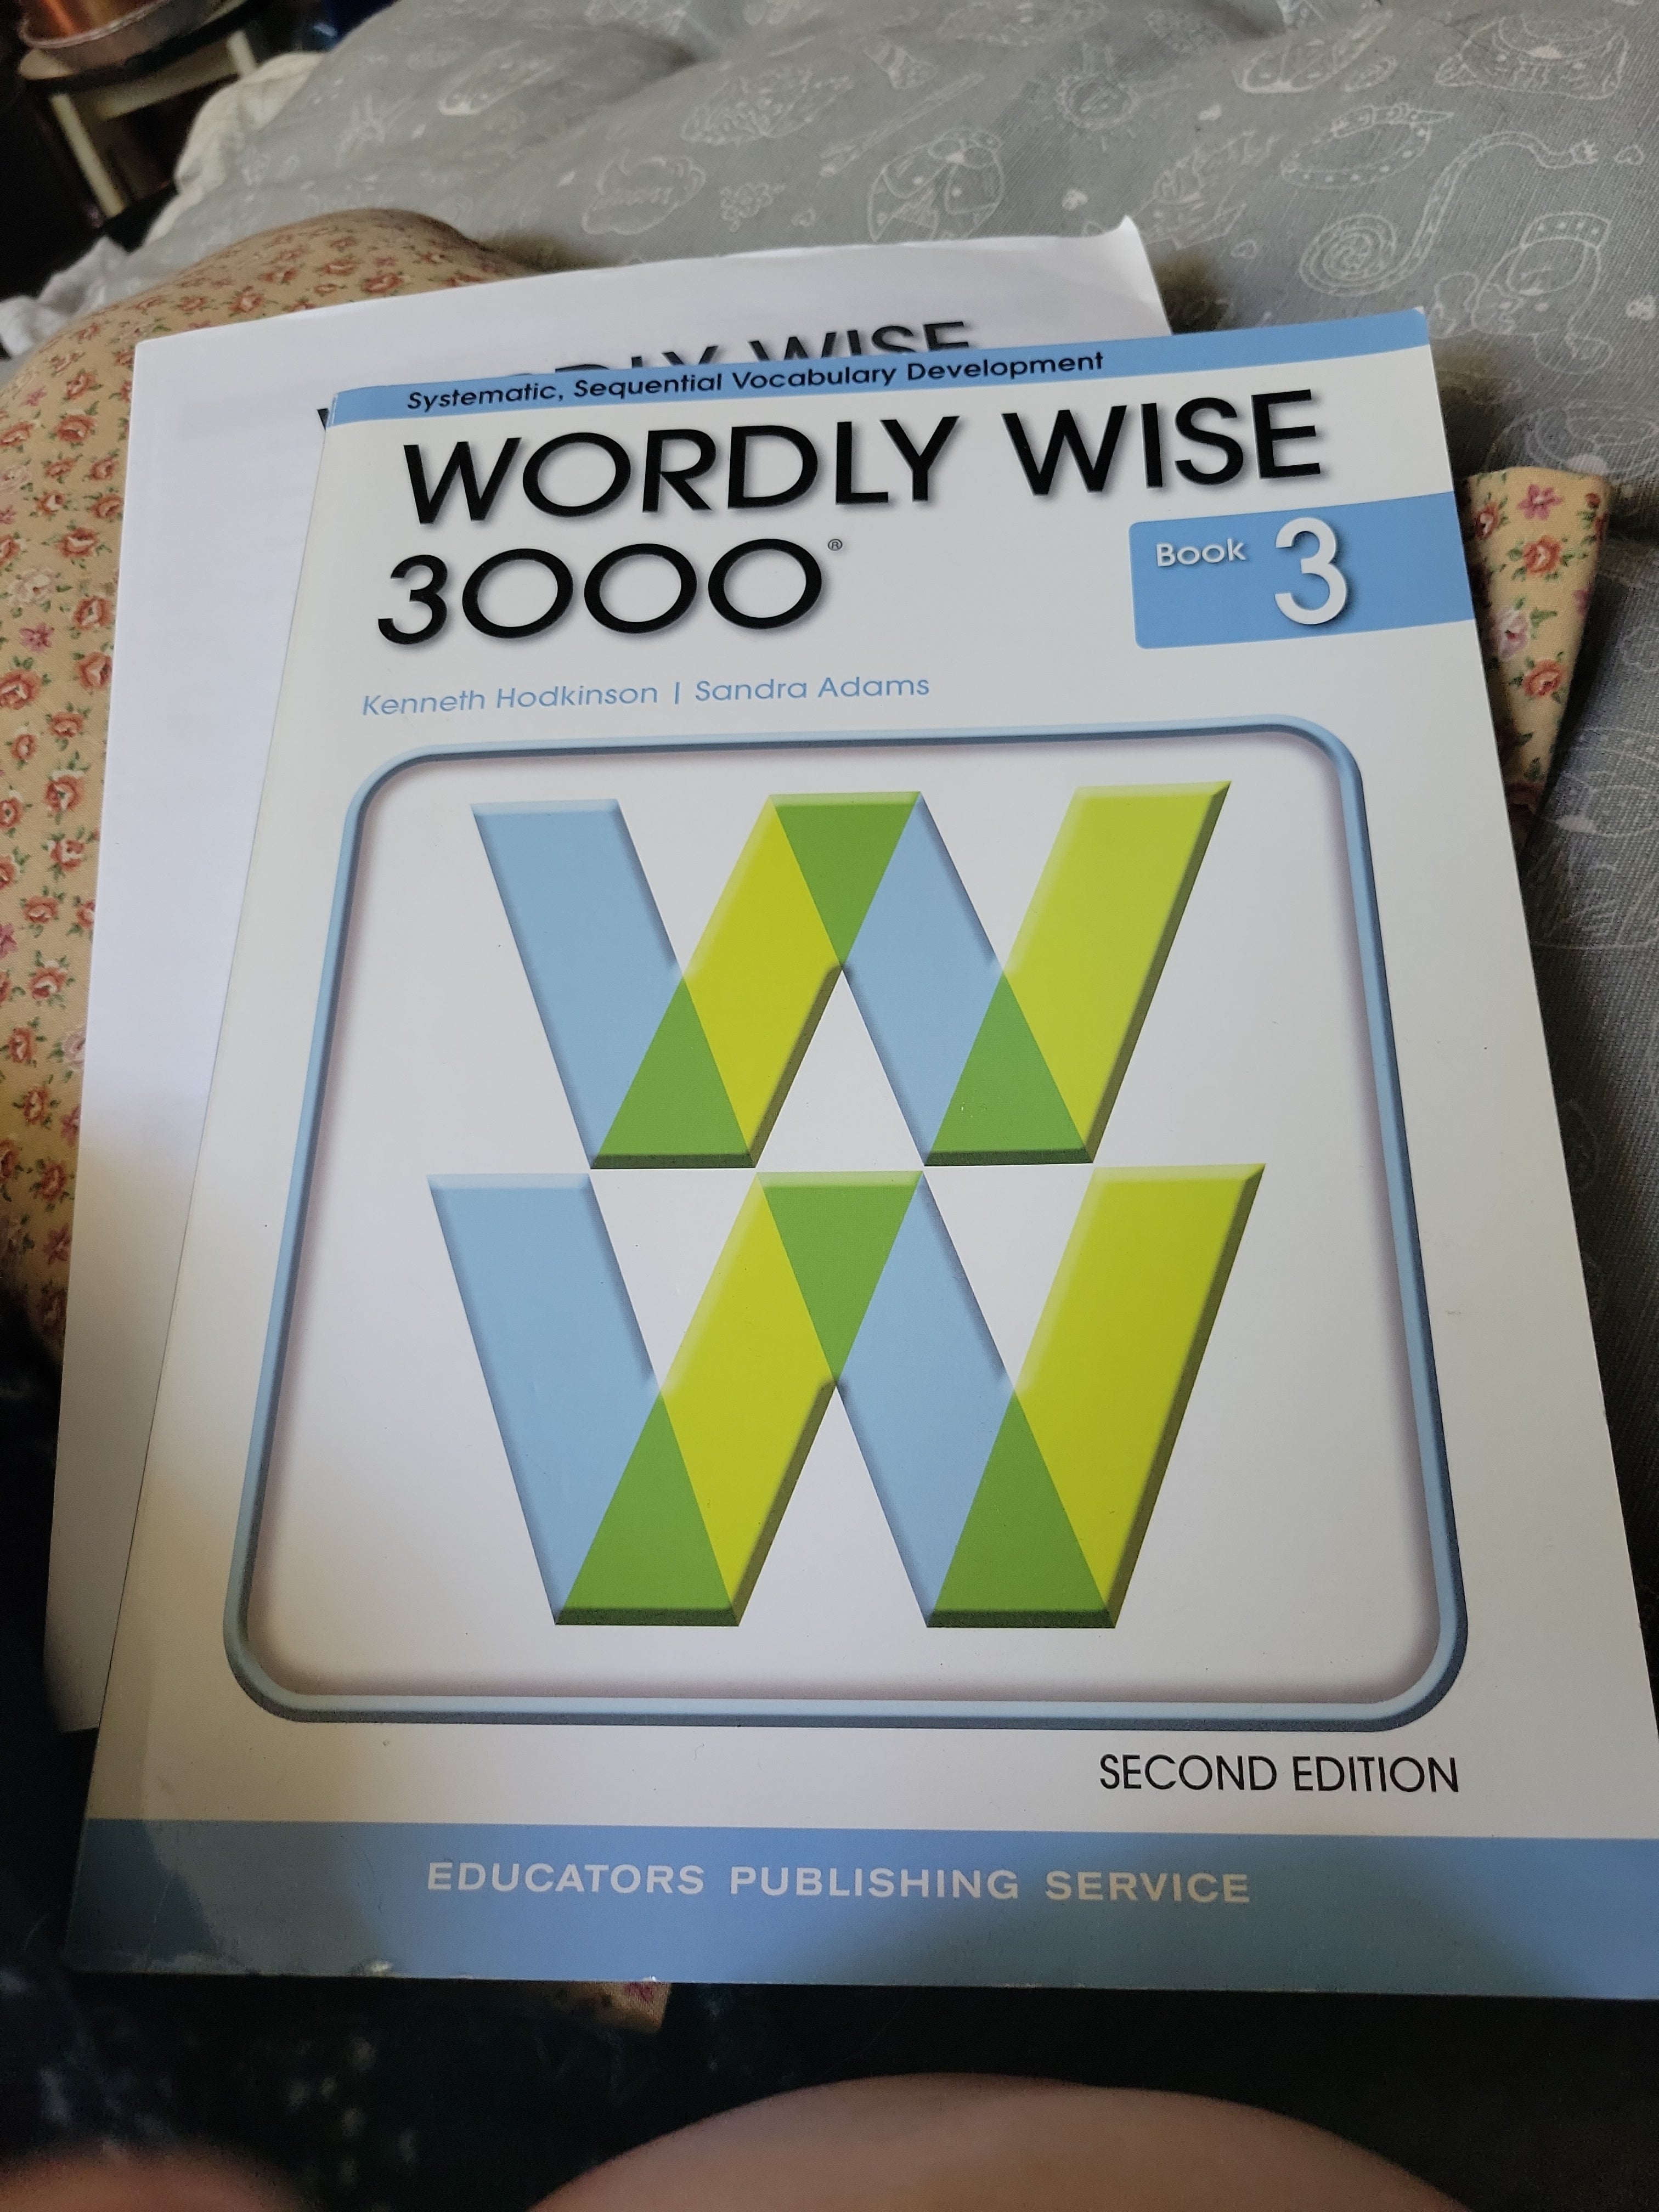 Wise　Book　Kenneth　Paperback　Wordly　Hodkinson,　by　3000　Pangobooks